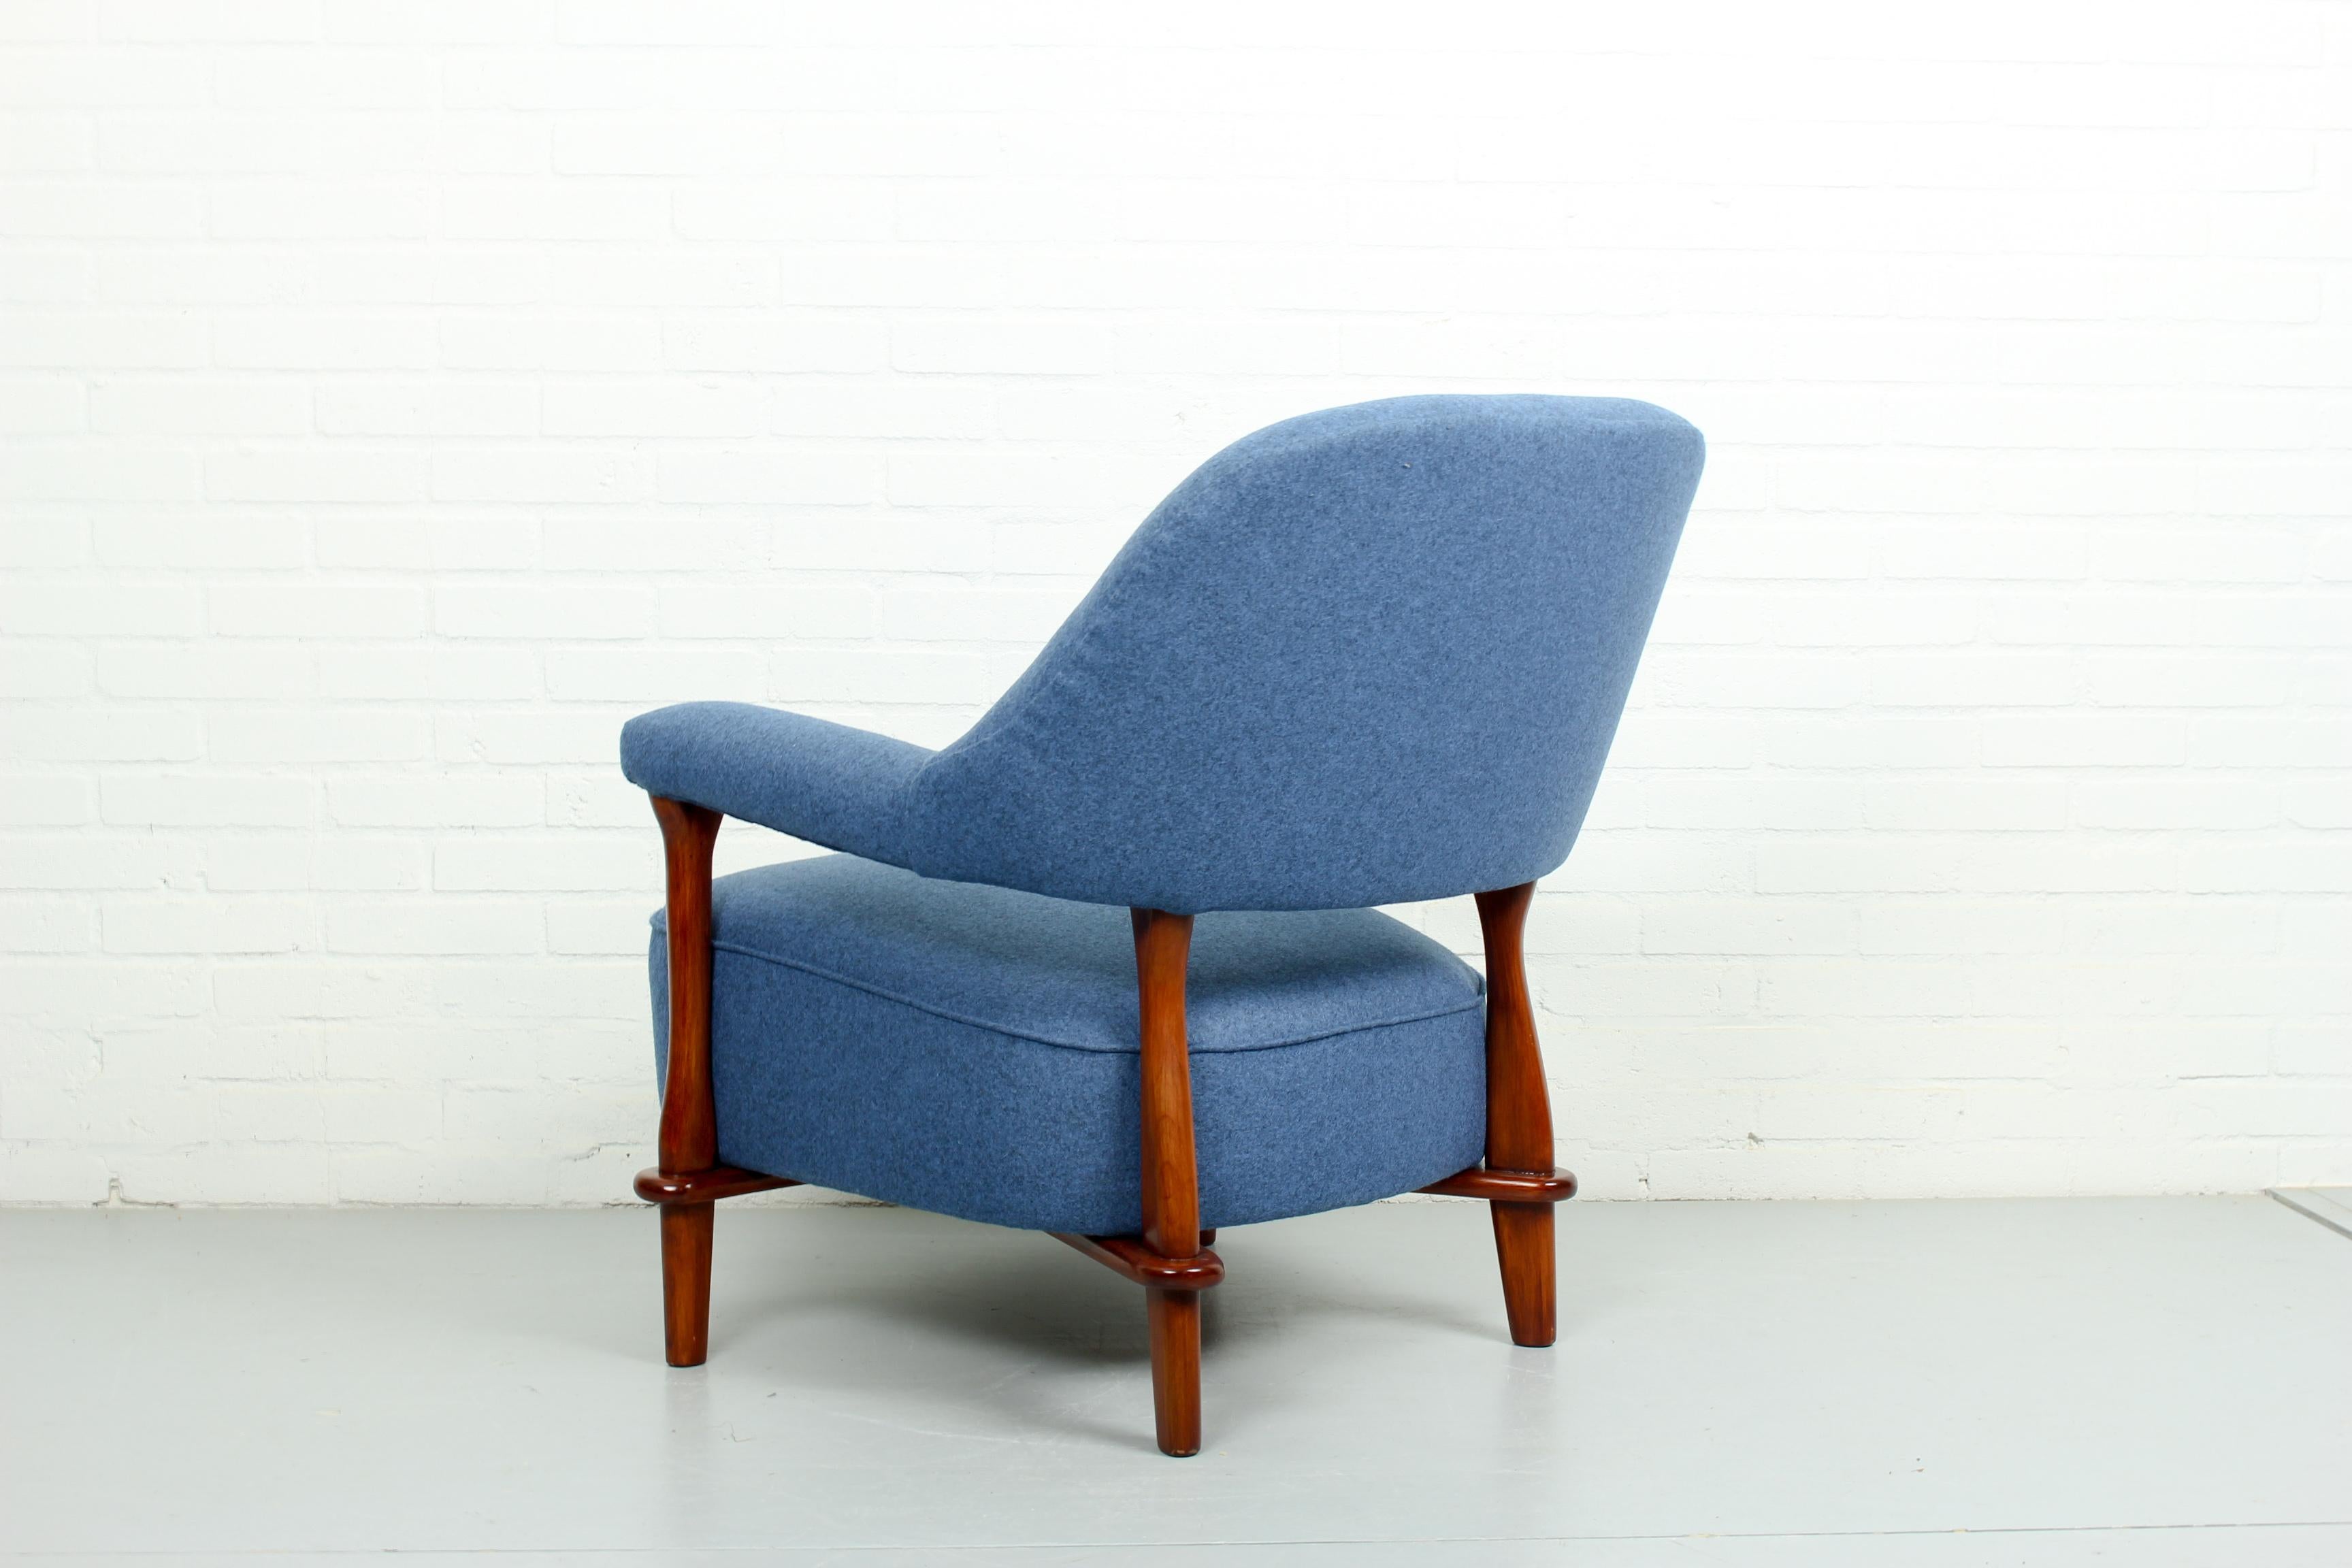 Dutch Midcentury Lounge Chair by Theo Ruth for Artifort, 1957